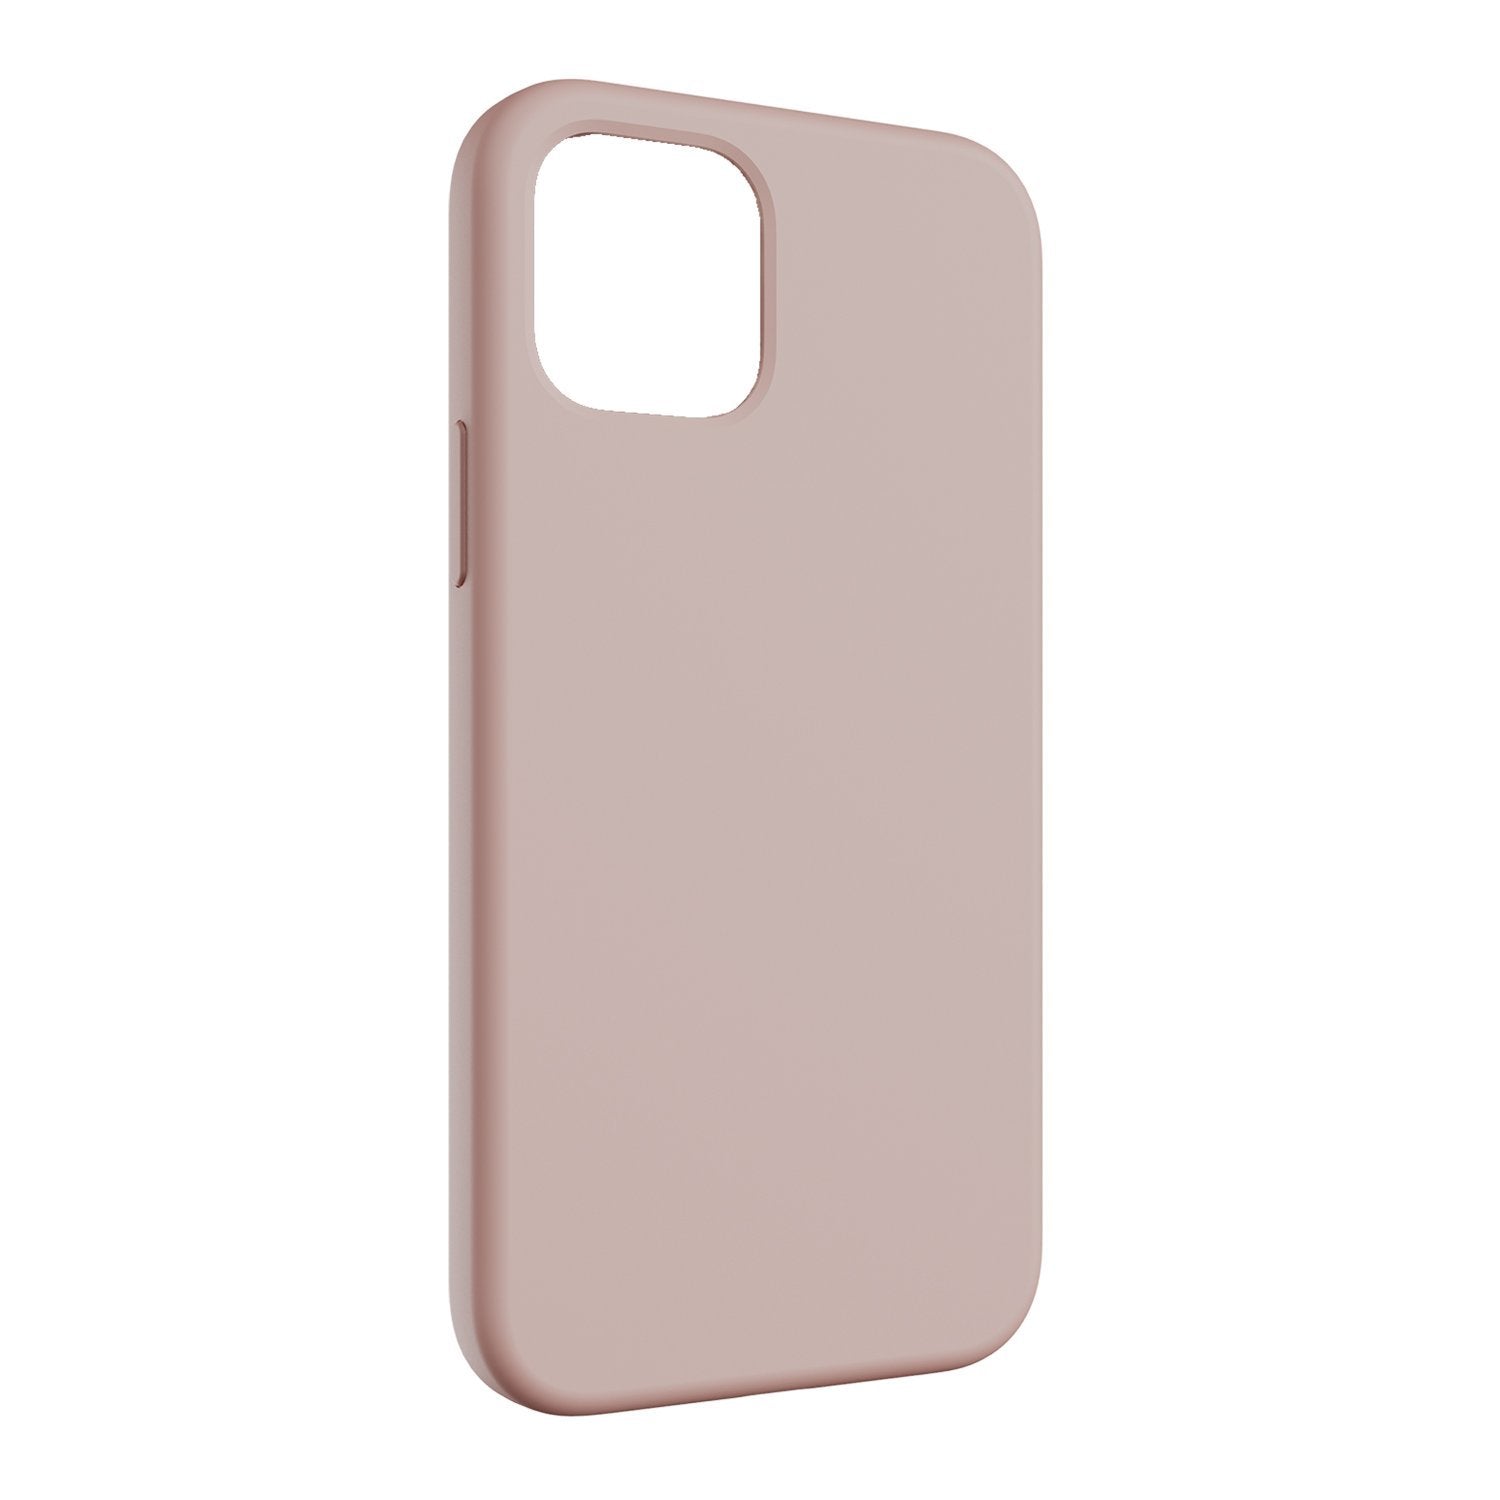 Switcheasy Skin Case for iPhone 12 mini 5.4"(2020), Pink Sand Default Switcheasy 